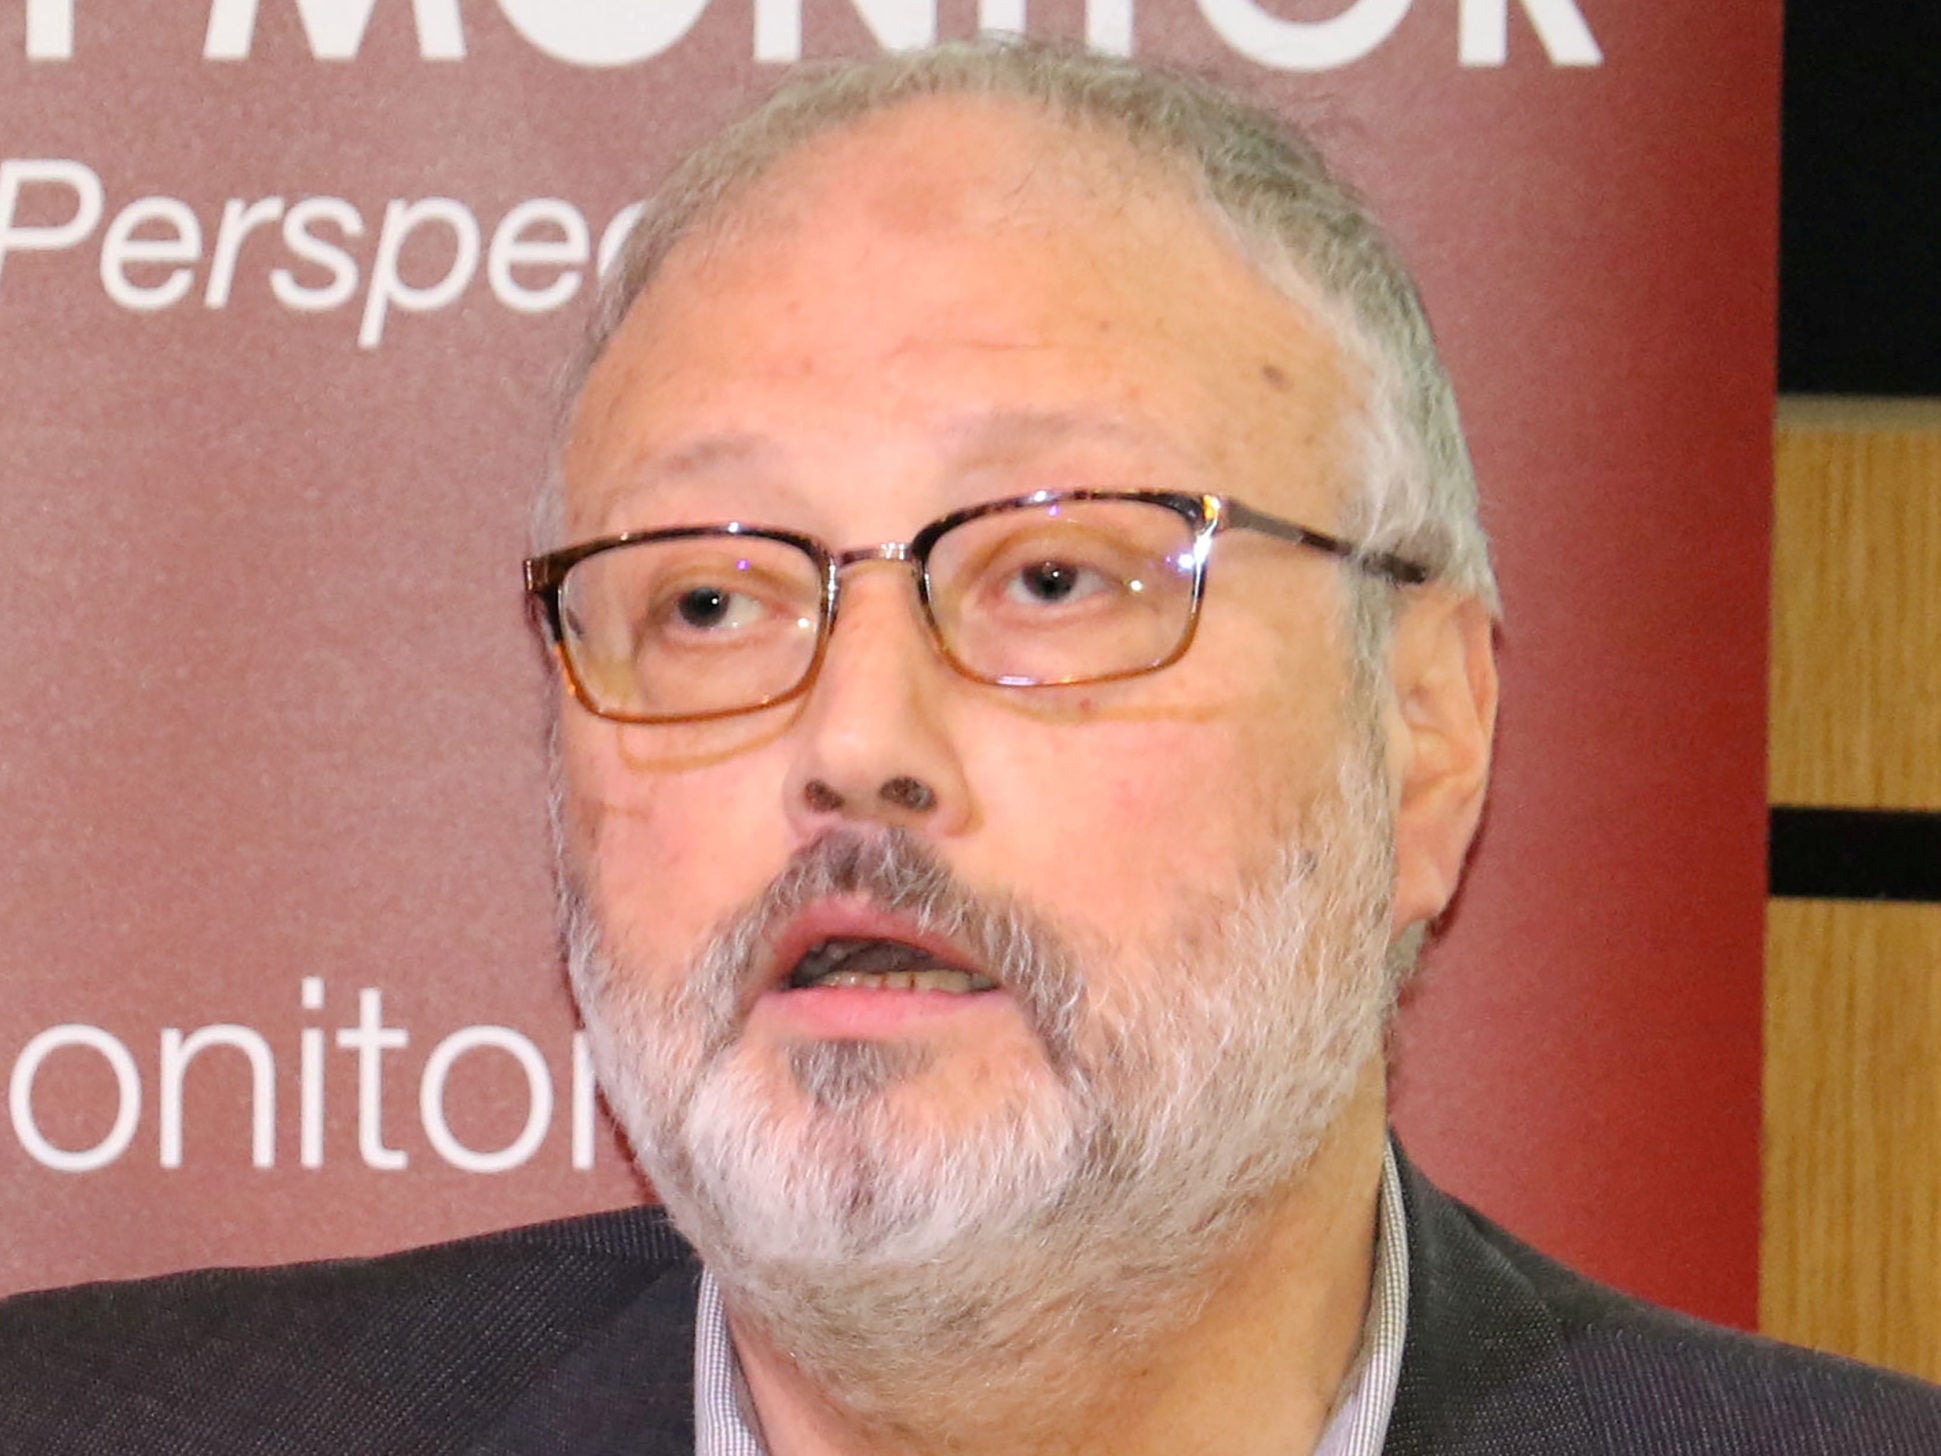 Judge orders US government agencies to release files related to Khashoggi killing